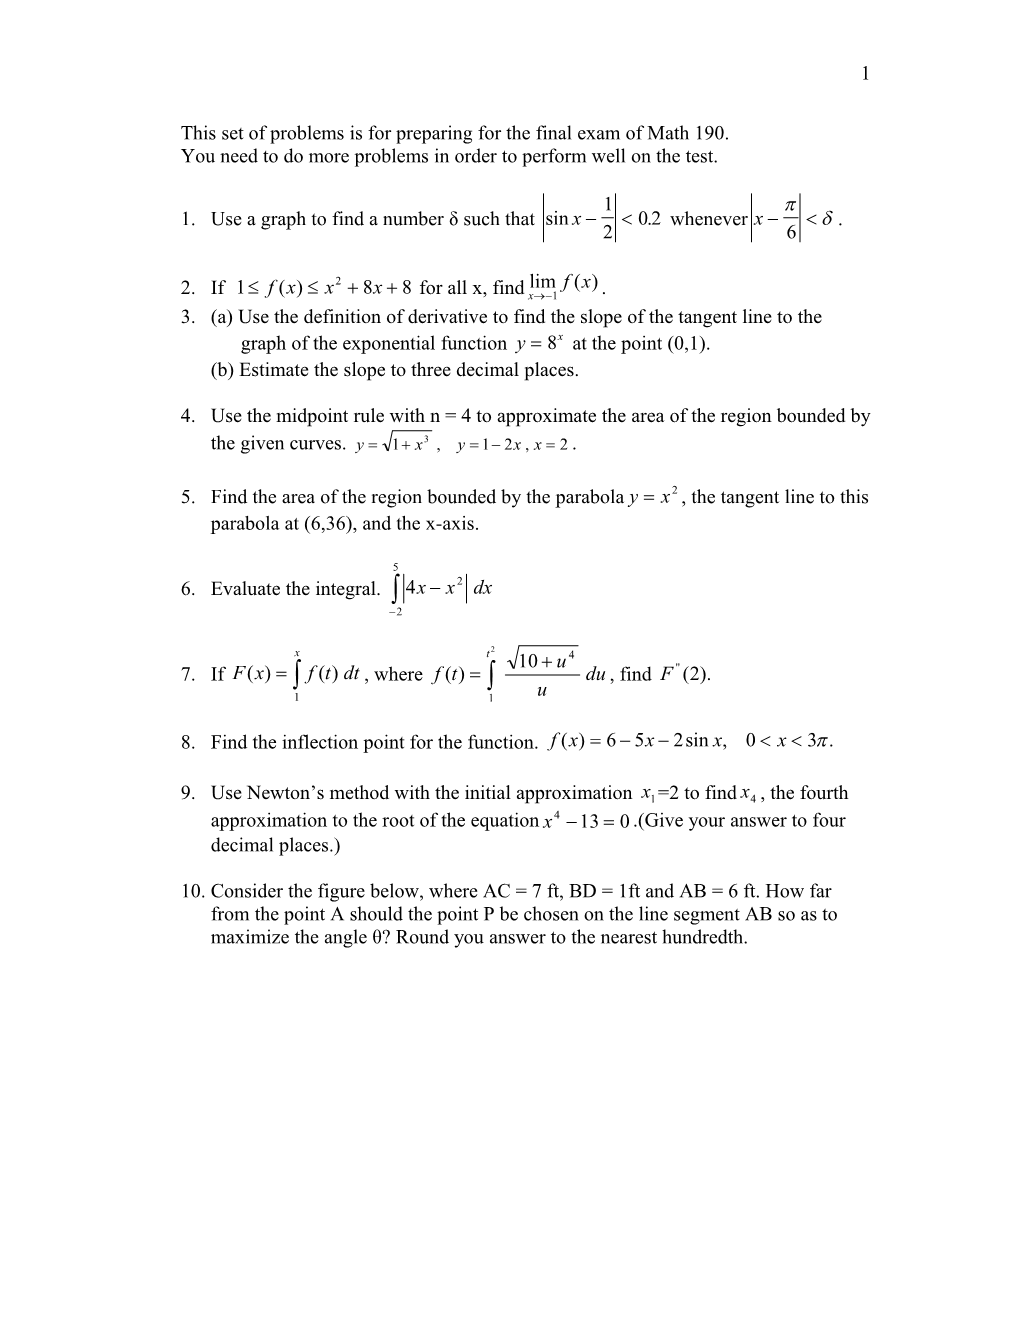 This Set of Problems Is for Preparing for the Final Exam of Math 190